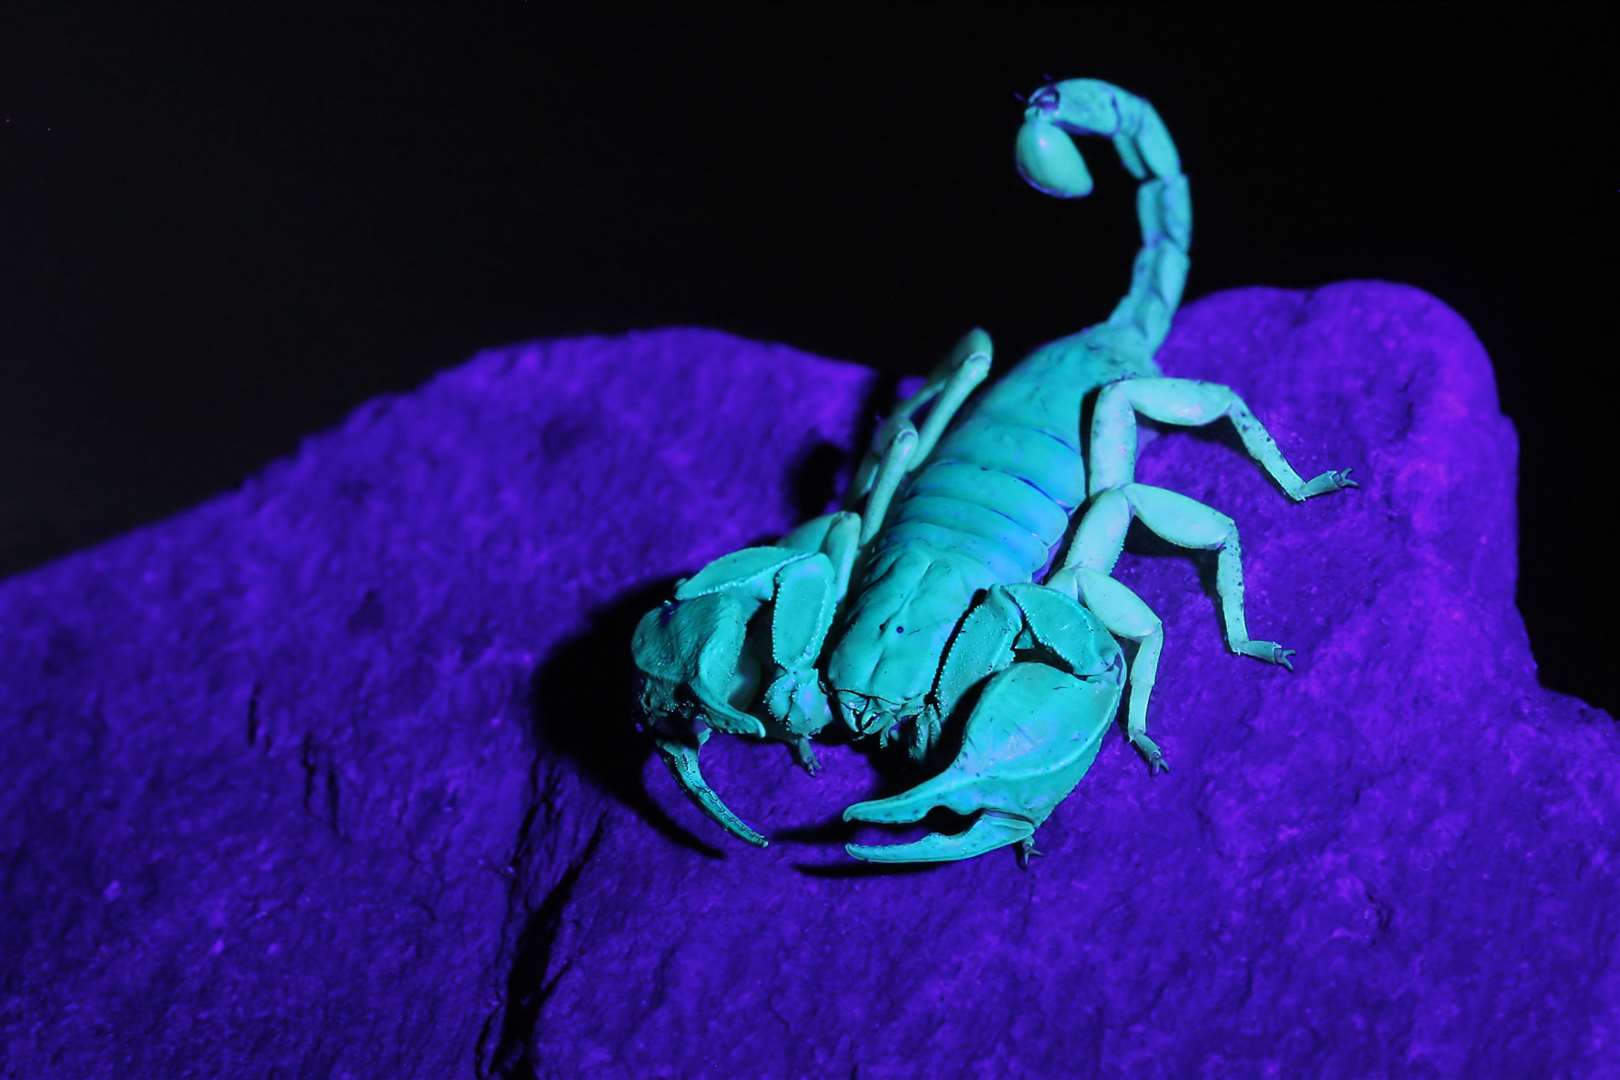 Yellow Tailed Scorpion from Blue Town, Sheerness, under UV light. Picture: Jason Steel www.jason-steel.co.uk